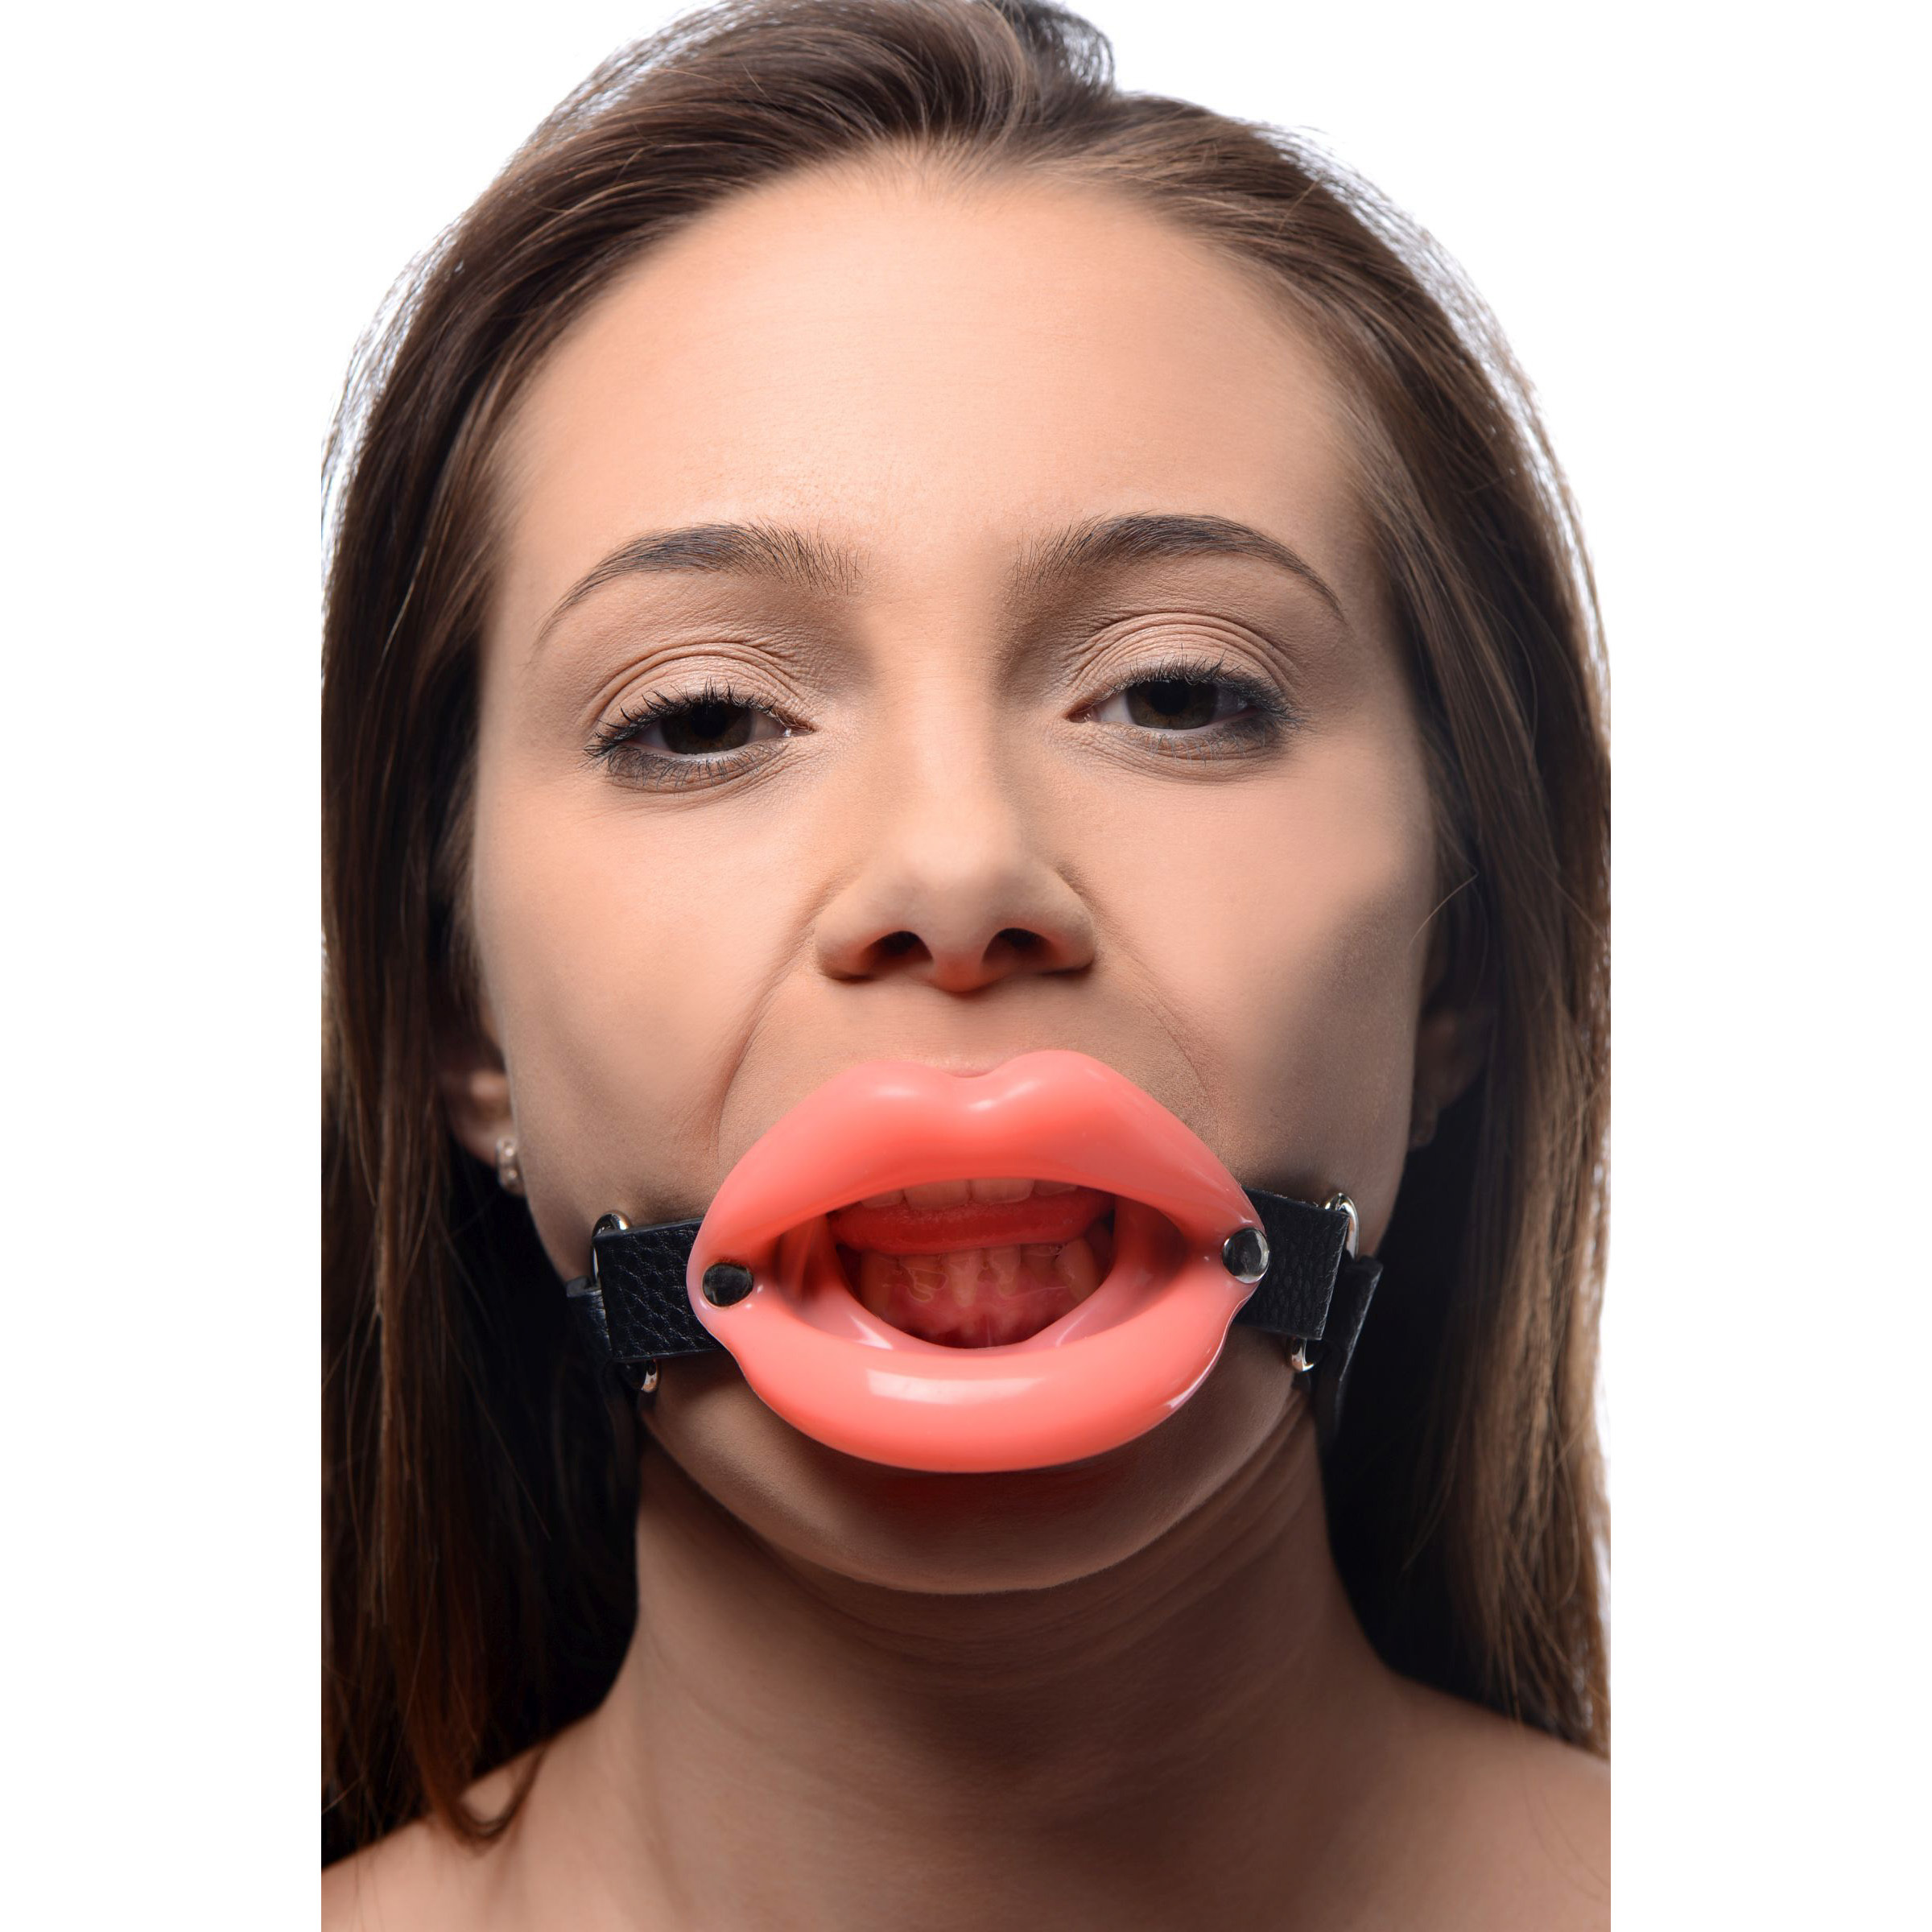 Sissy Mouth Gag Sex Toy Distributing pic